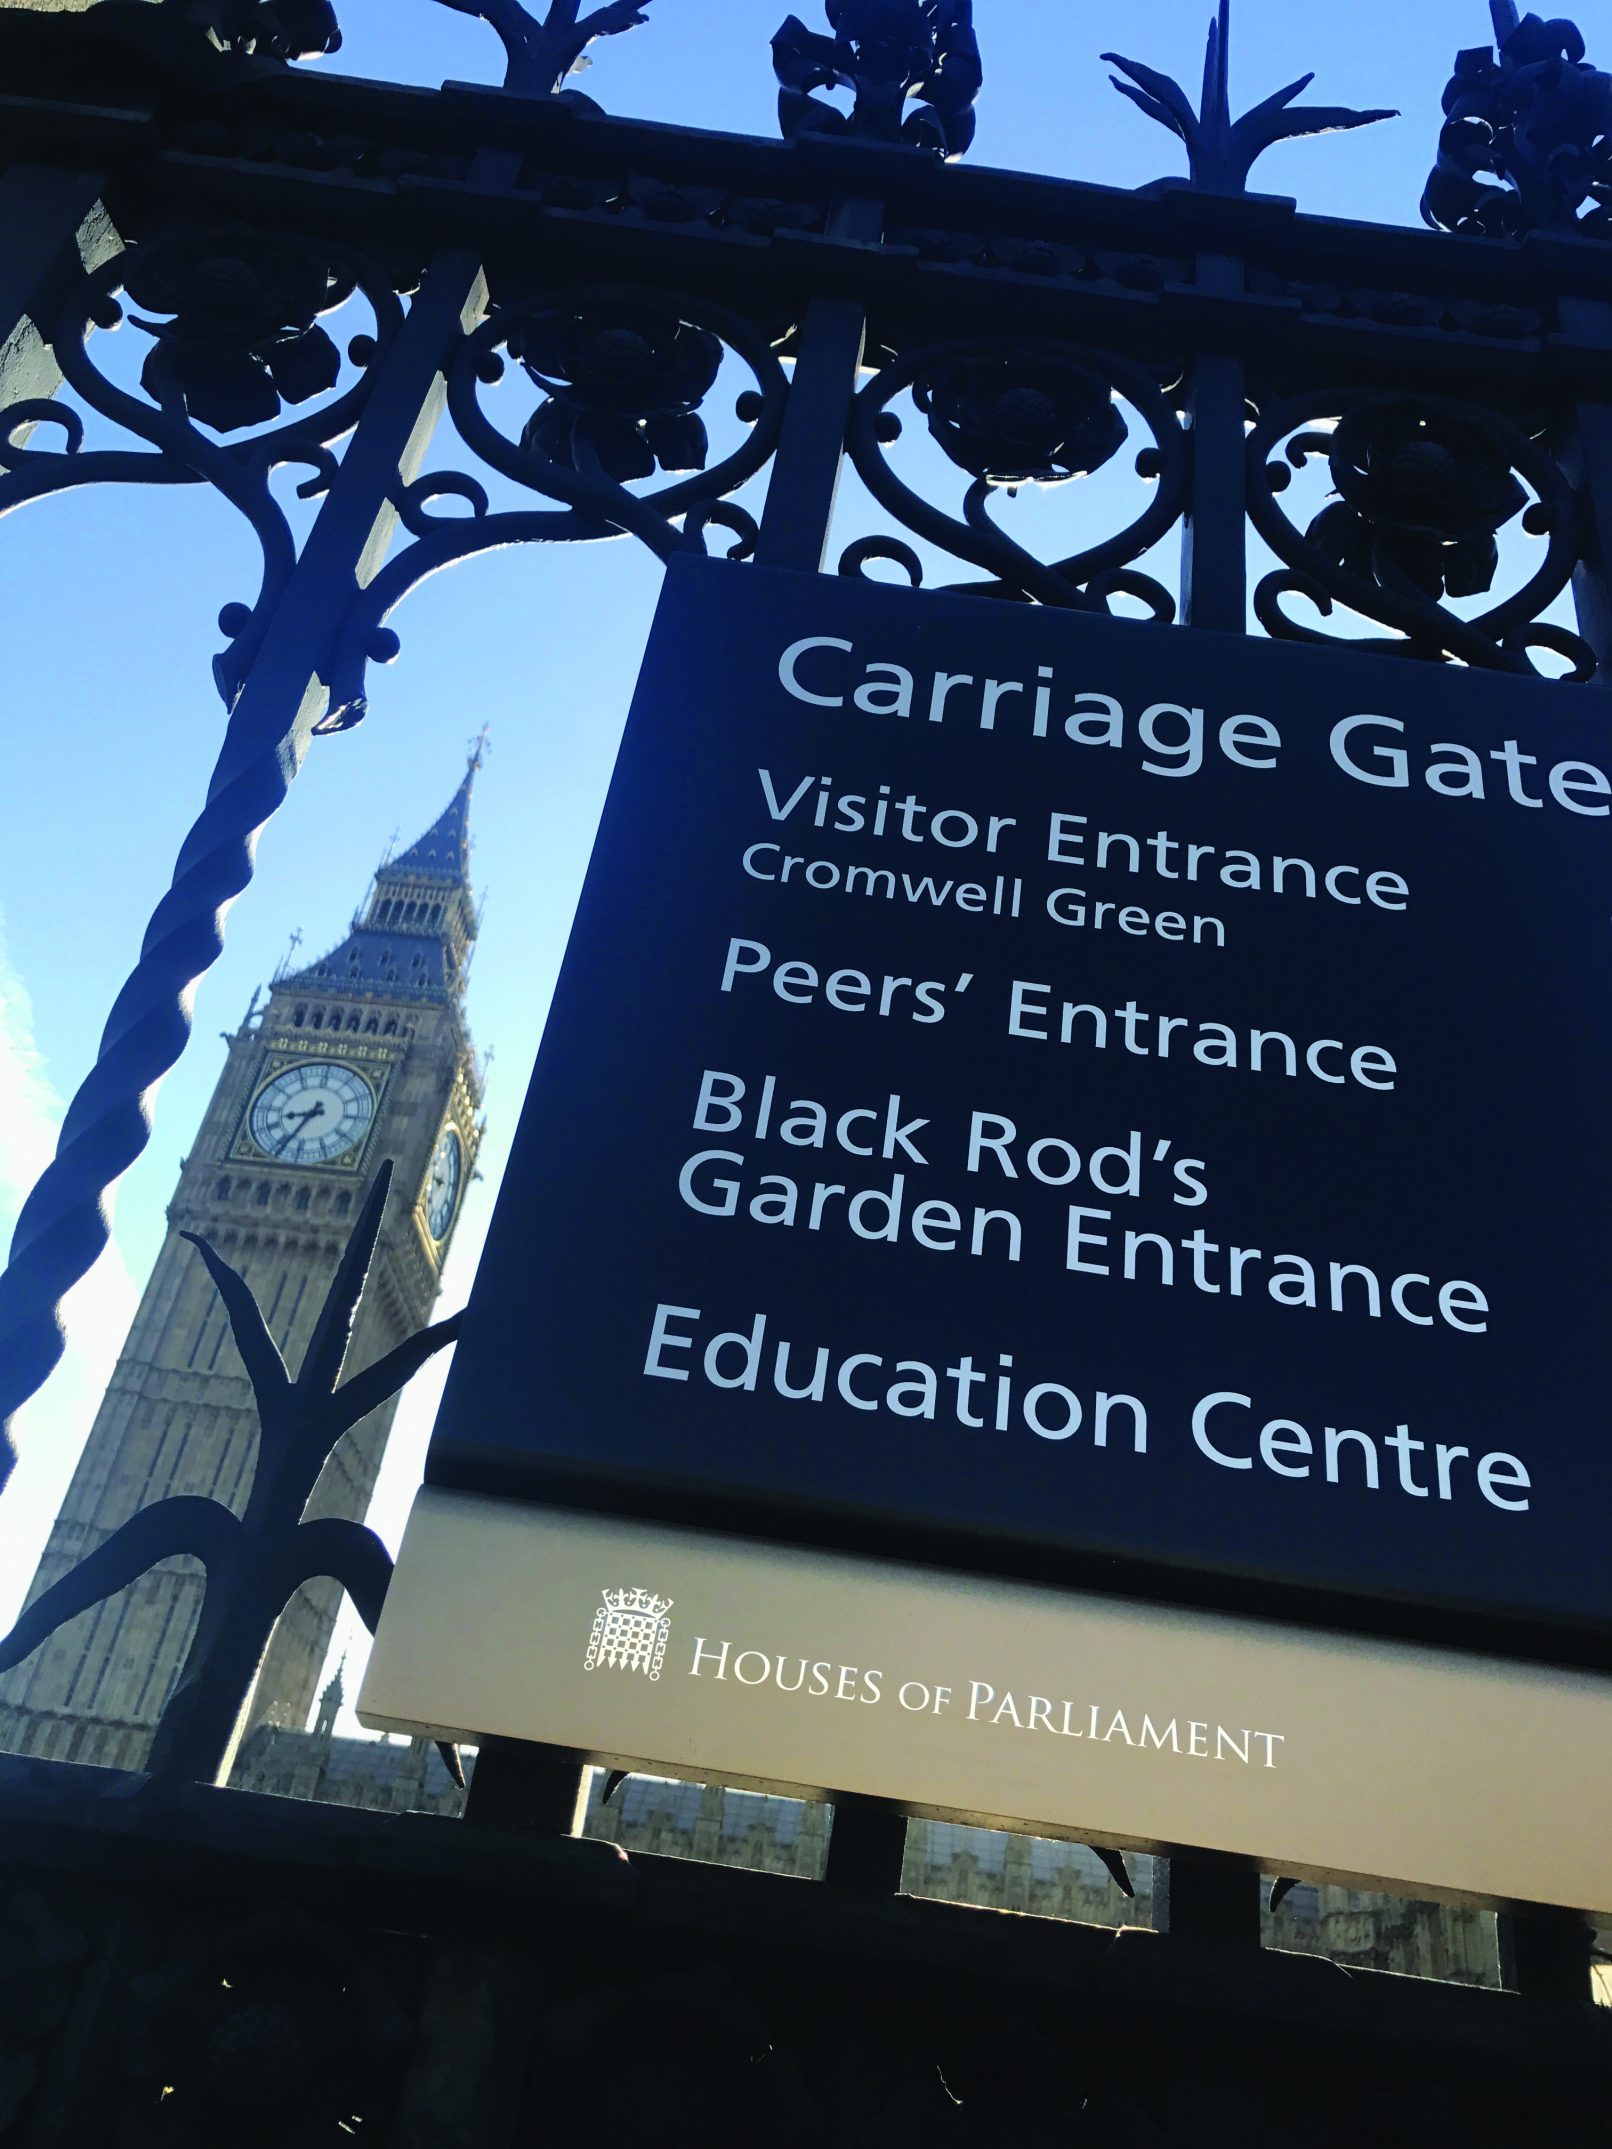 Houses of parliament wayfinding & signage